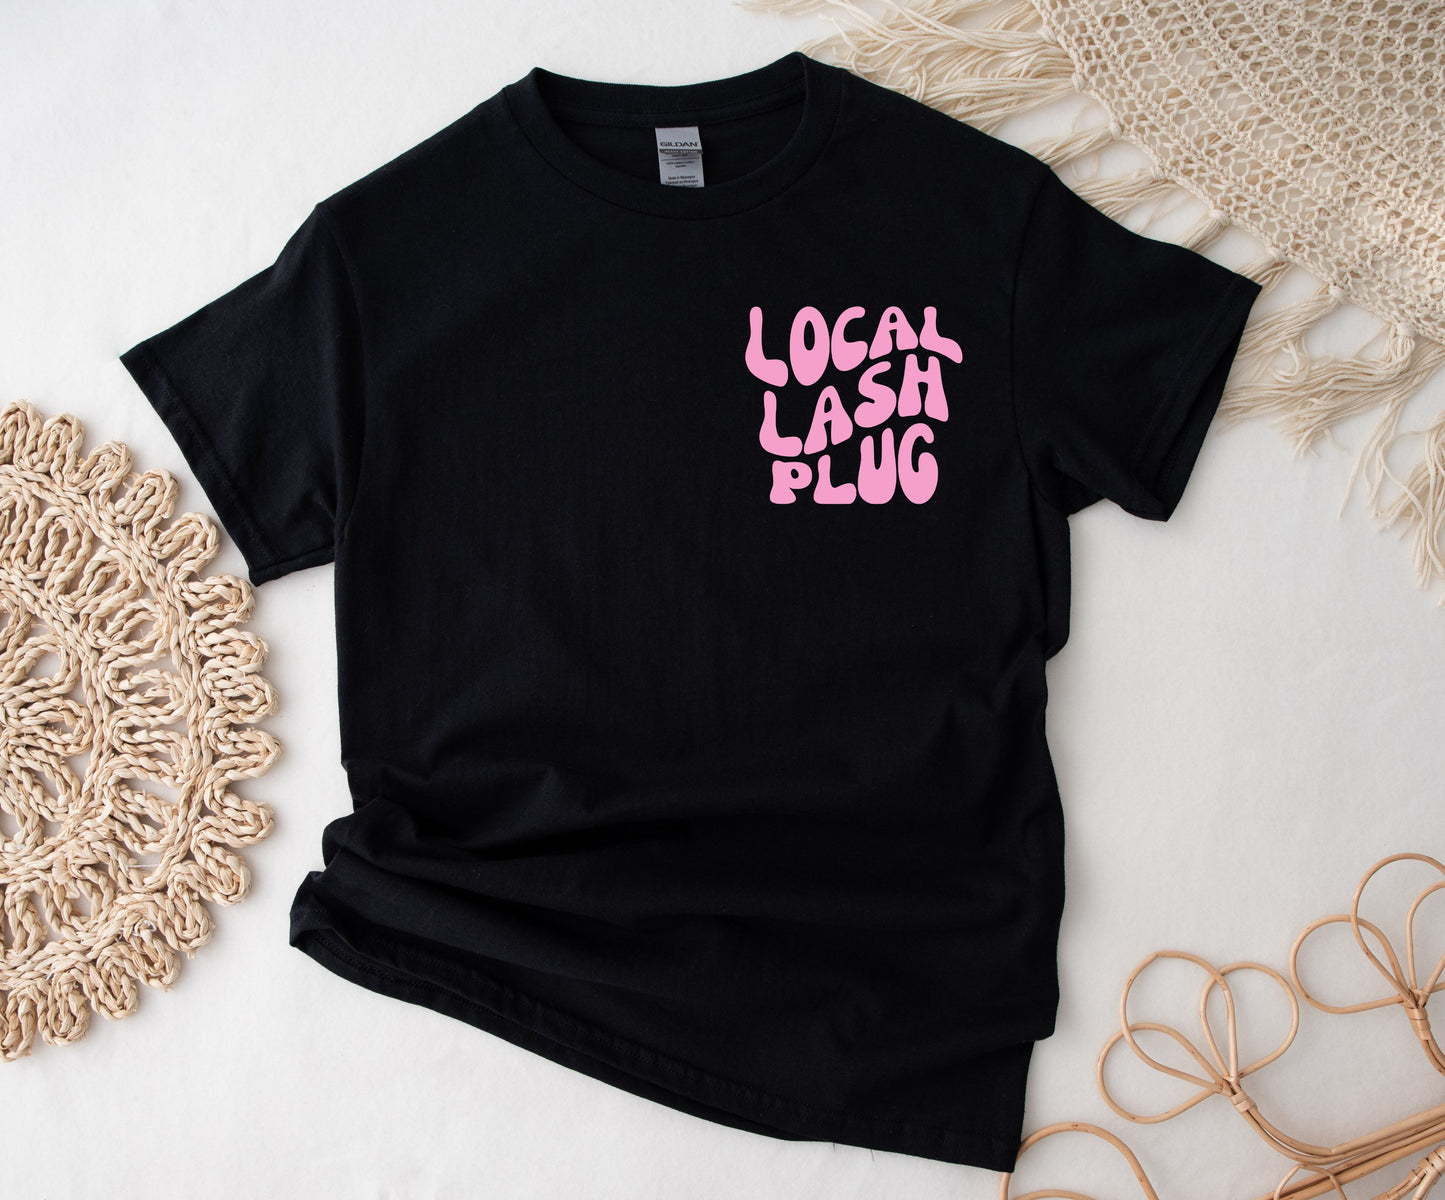 LOCAL LASH PLUG (add instagram name on the back, front and back print) - SWEATSHIRT or T-SHIRT